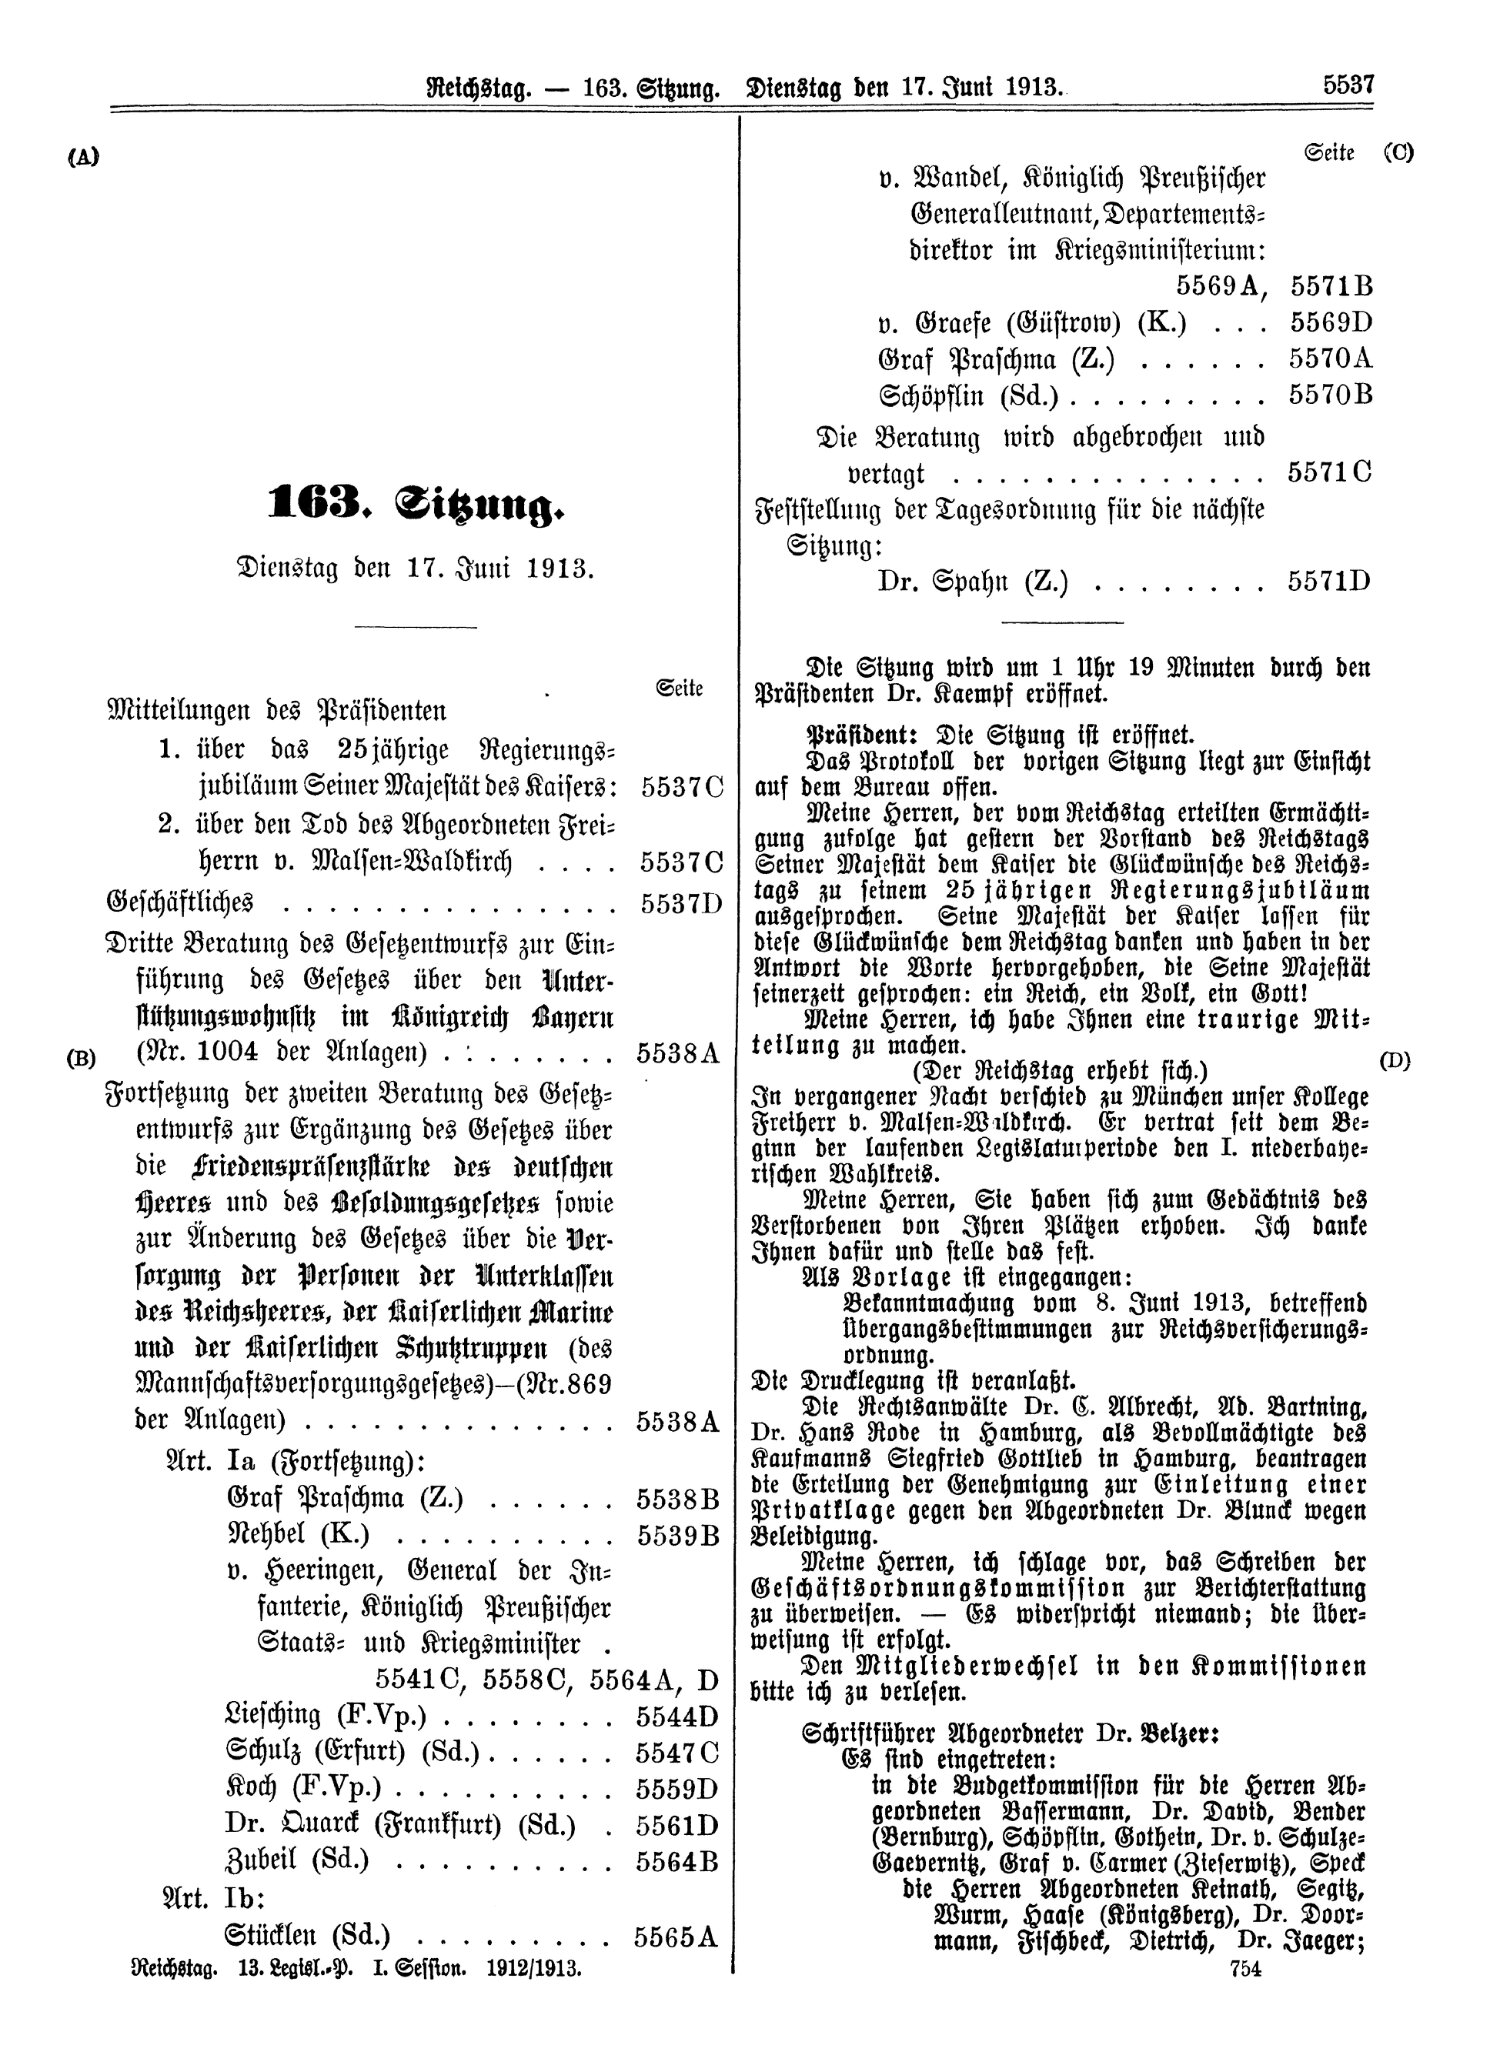 Scan of page 5537